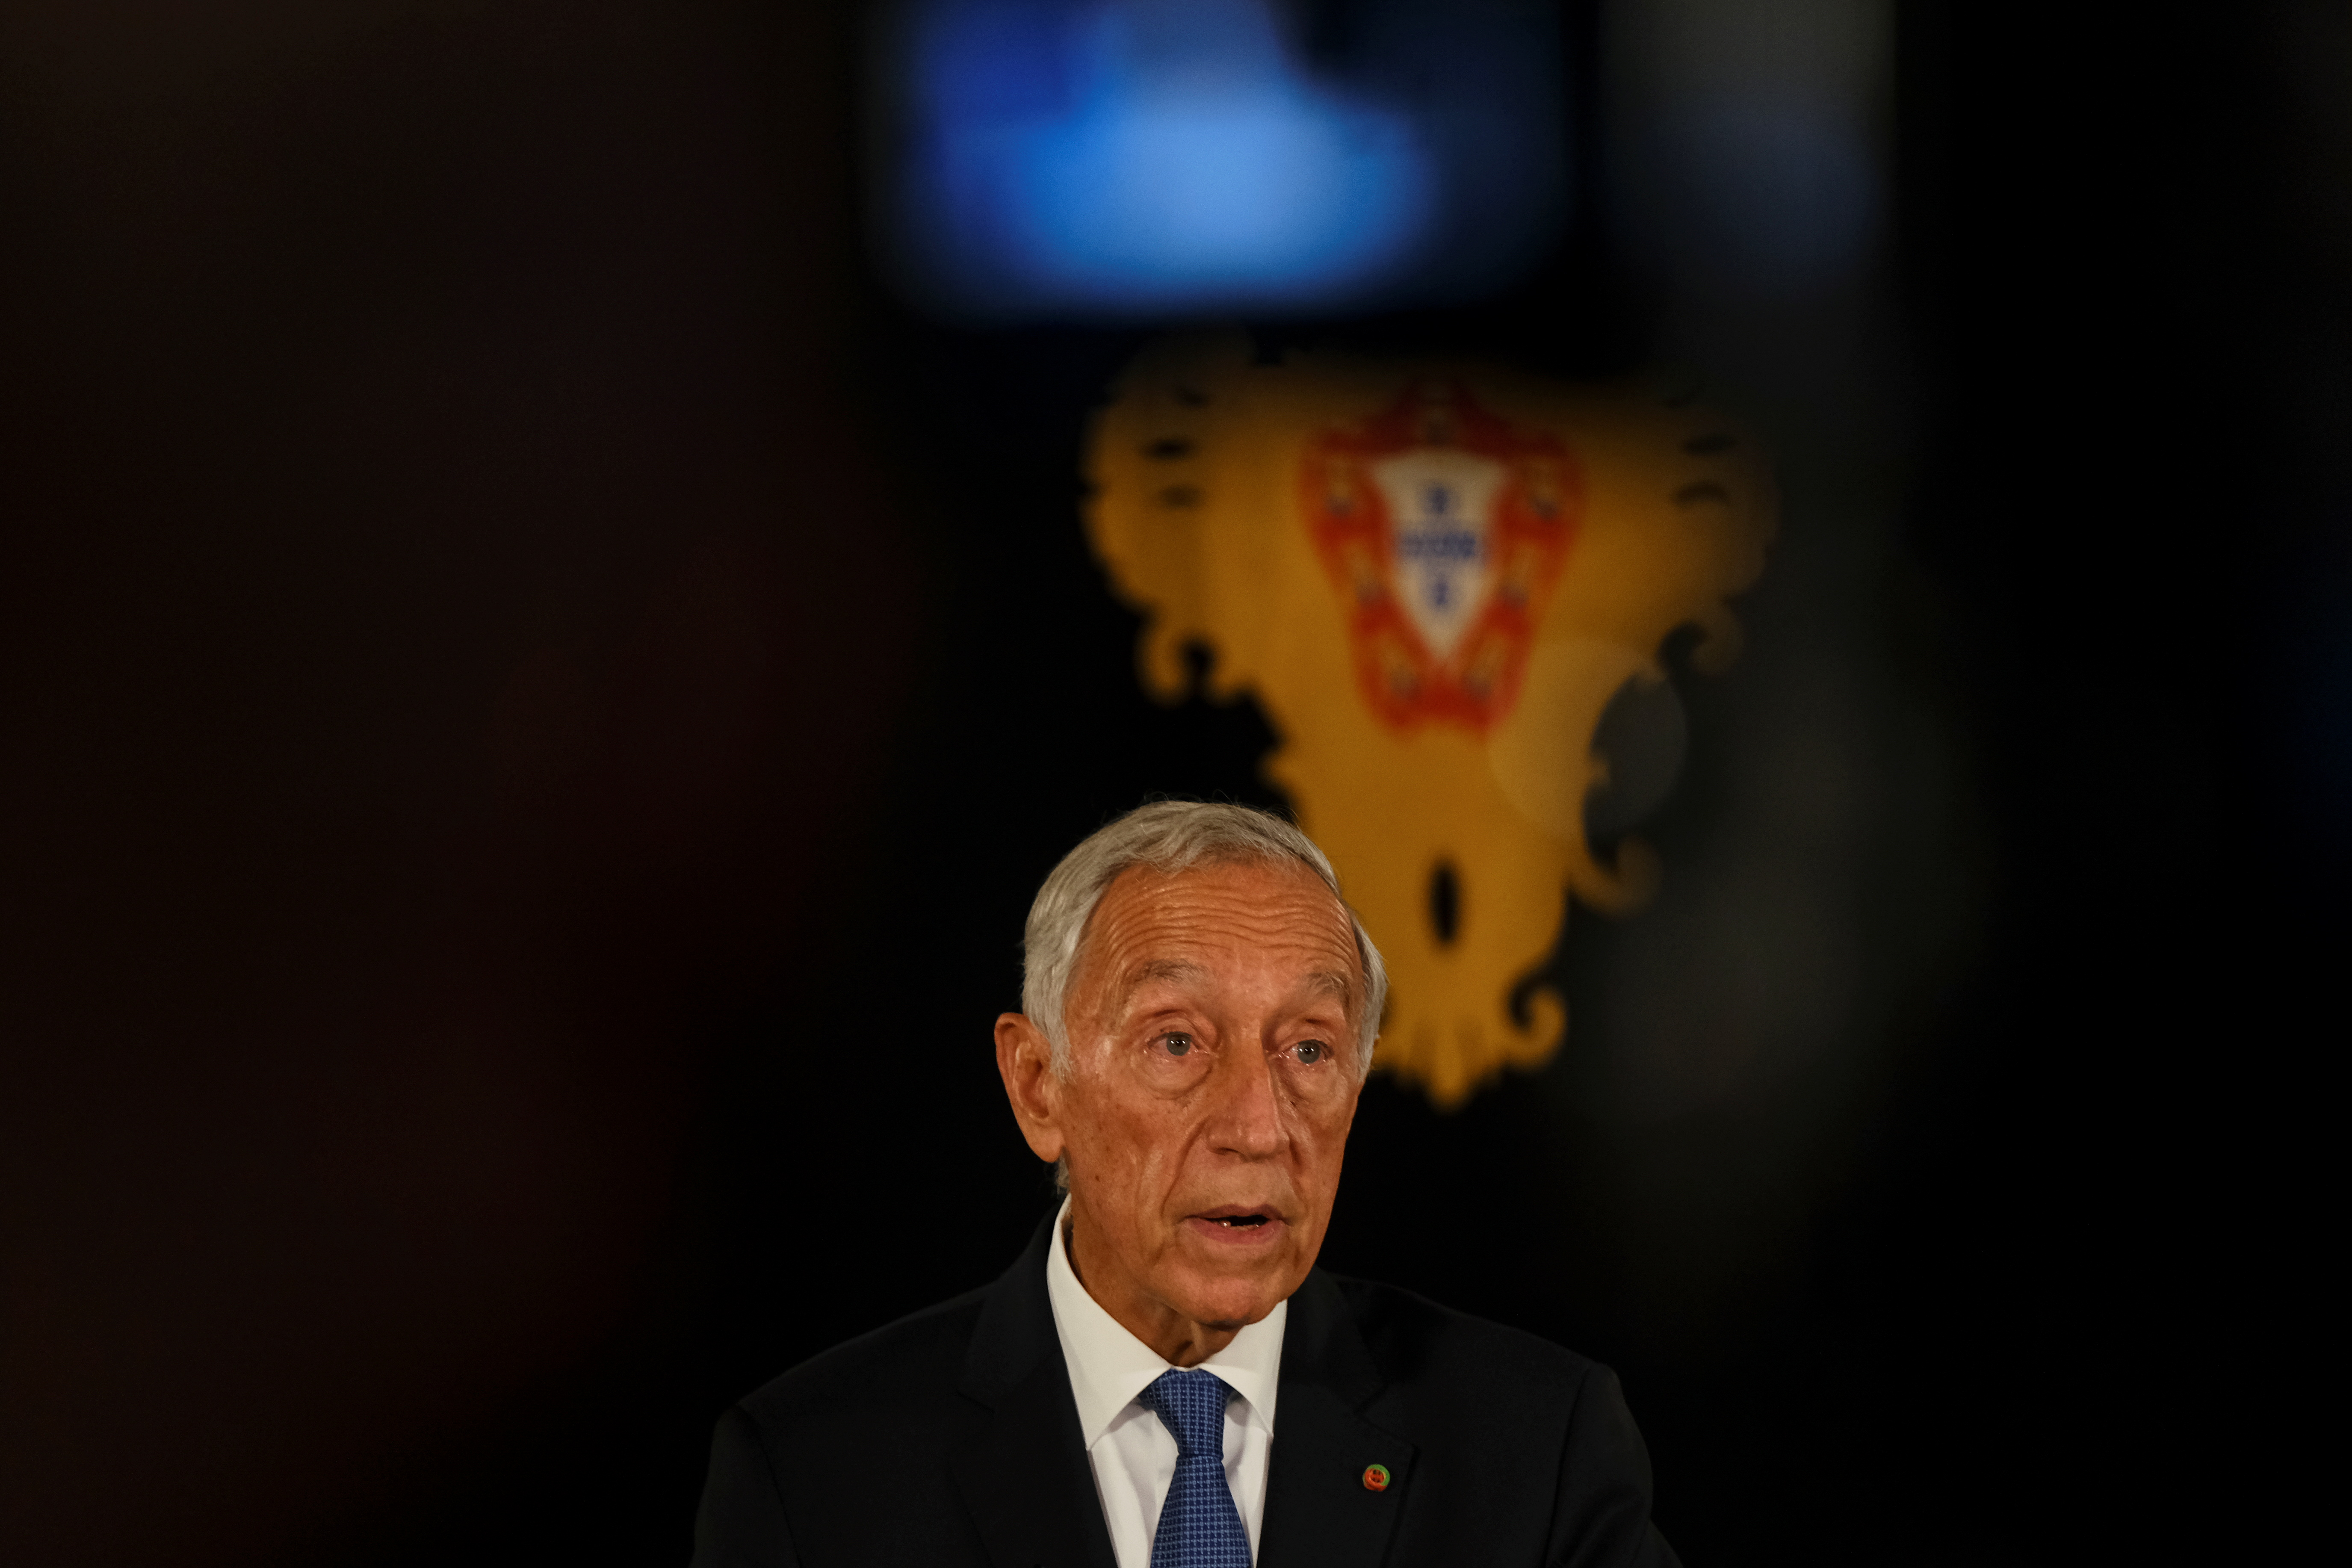 Portugal's President de Sousa addresses the nation to announce his decision to dissolve parliament triggering snap general elections, in Belem Palace, in Lisbon